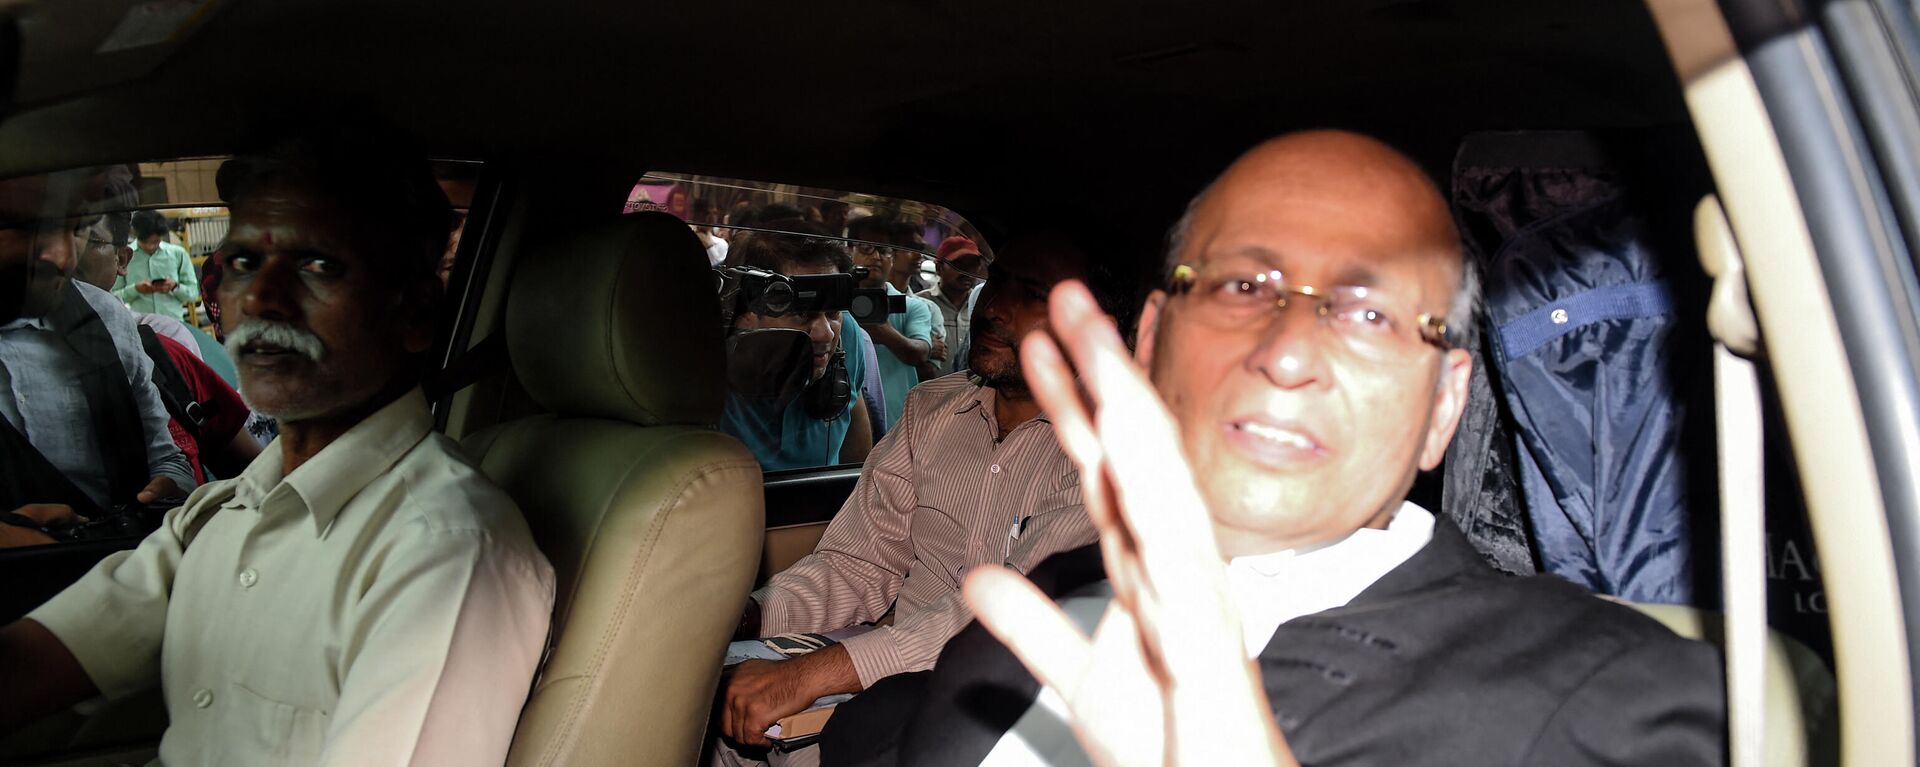 Lawyer and politician Abhishek Manu Singhvi (R) reacts as he enters a court in New Delhi on August 22, 2019, for the case of ex-finance minister Palaniappan Chidambaram - Sputnik International, 1920, 06.10.2021